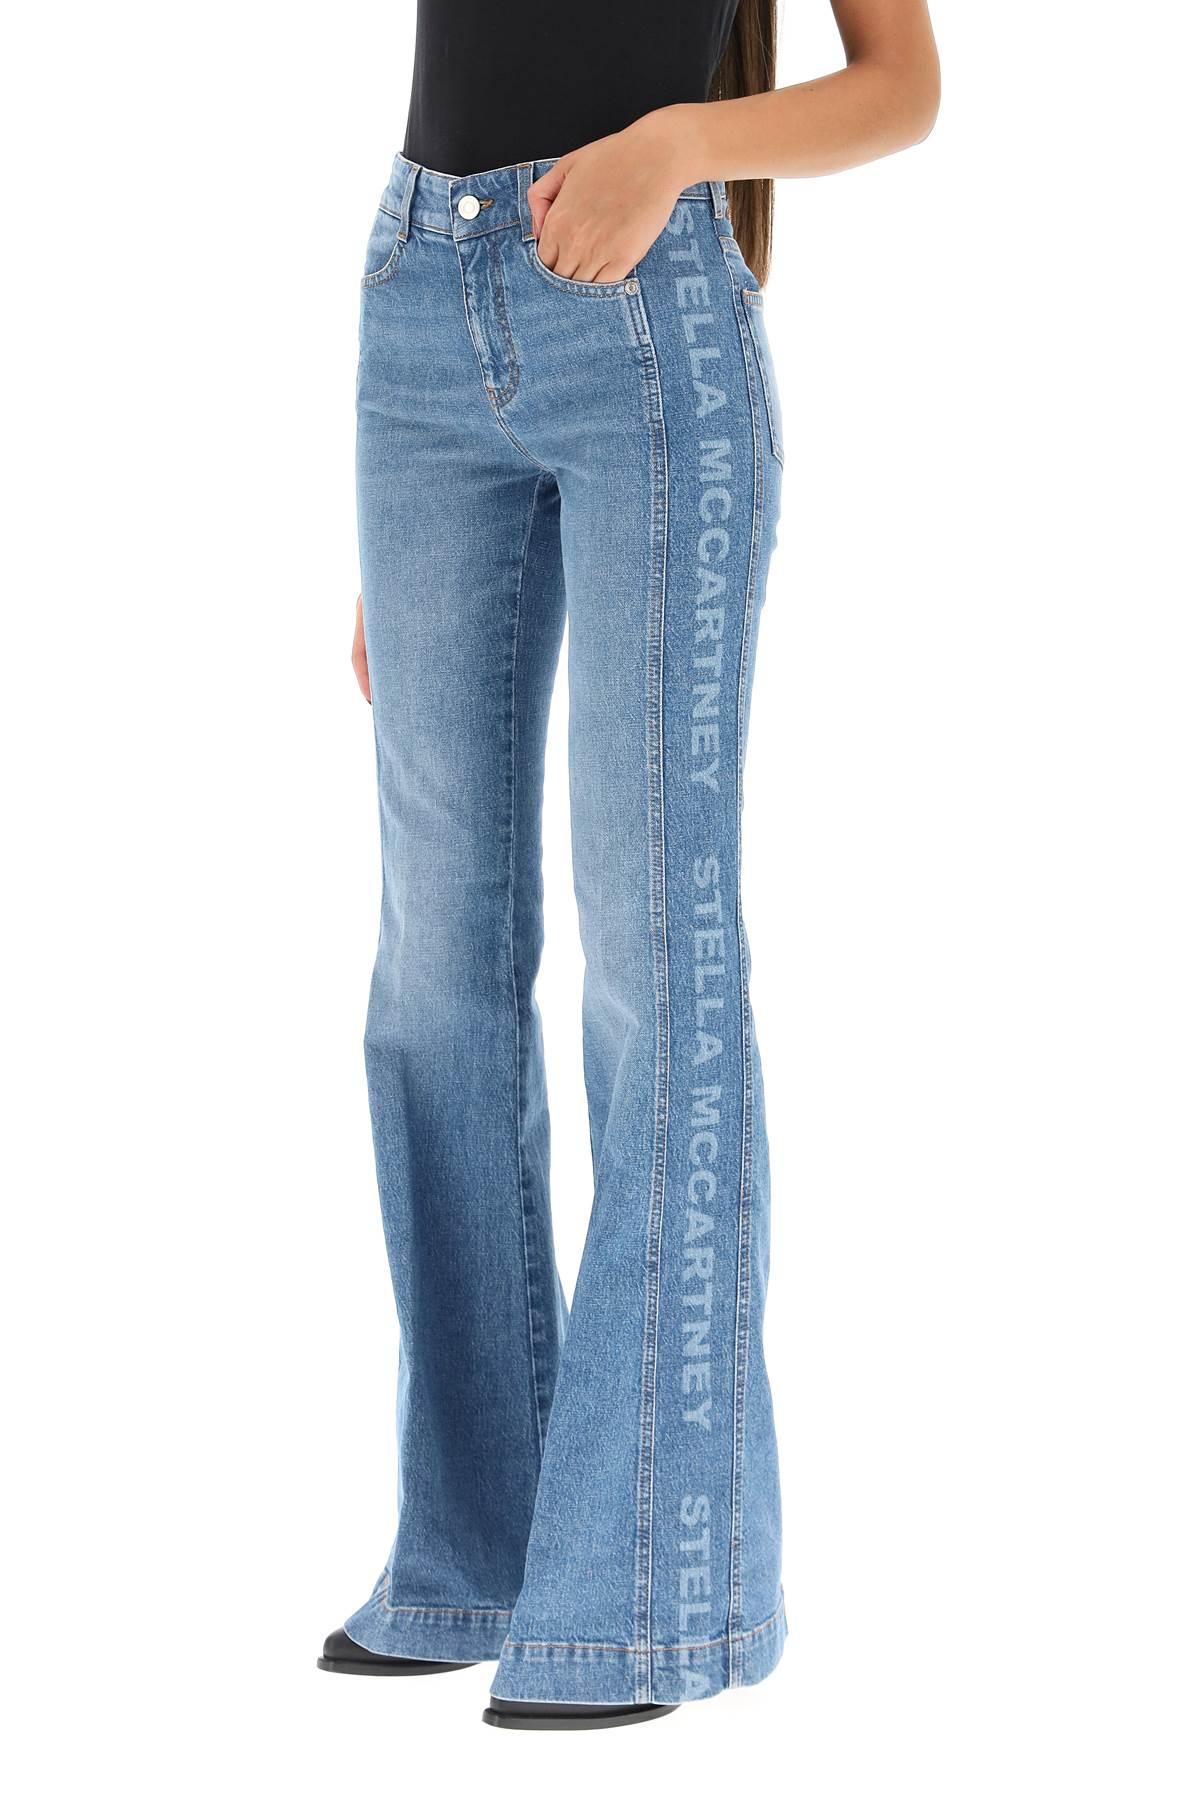 Stella McCartney Denim Flared Jeans With Logo Bands in Blue Save 7% Womens Clothing Jeans Flare and bell bottom jeans 